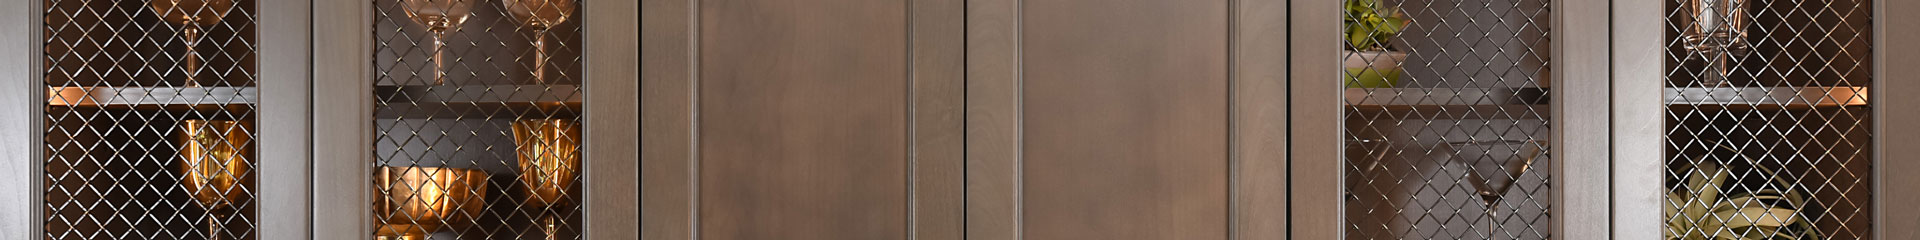 Close up of wood cabinet doors with wire mesh inserts